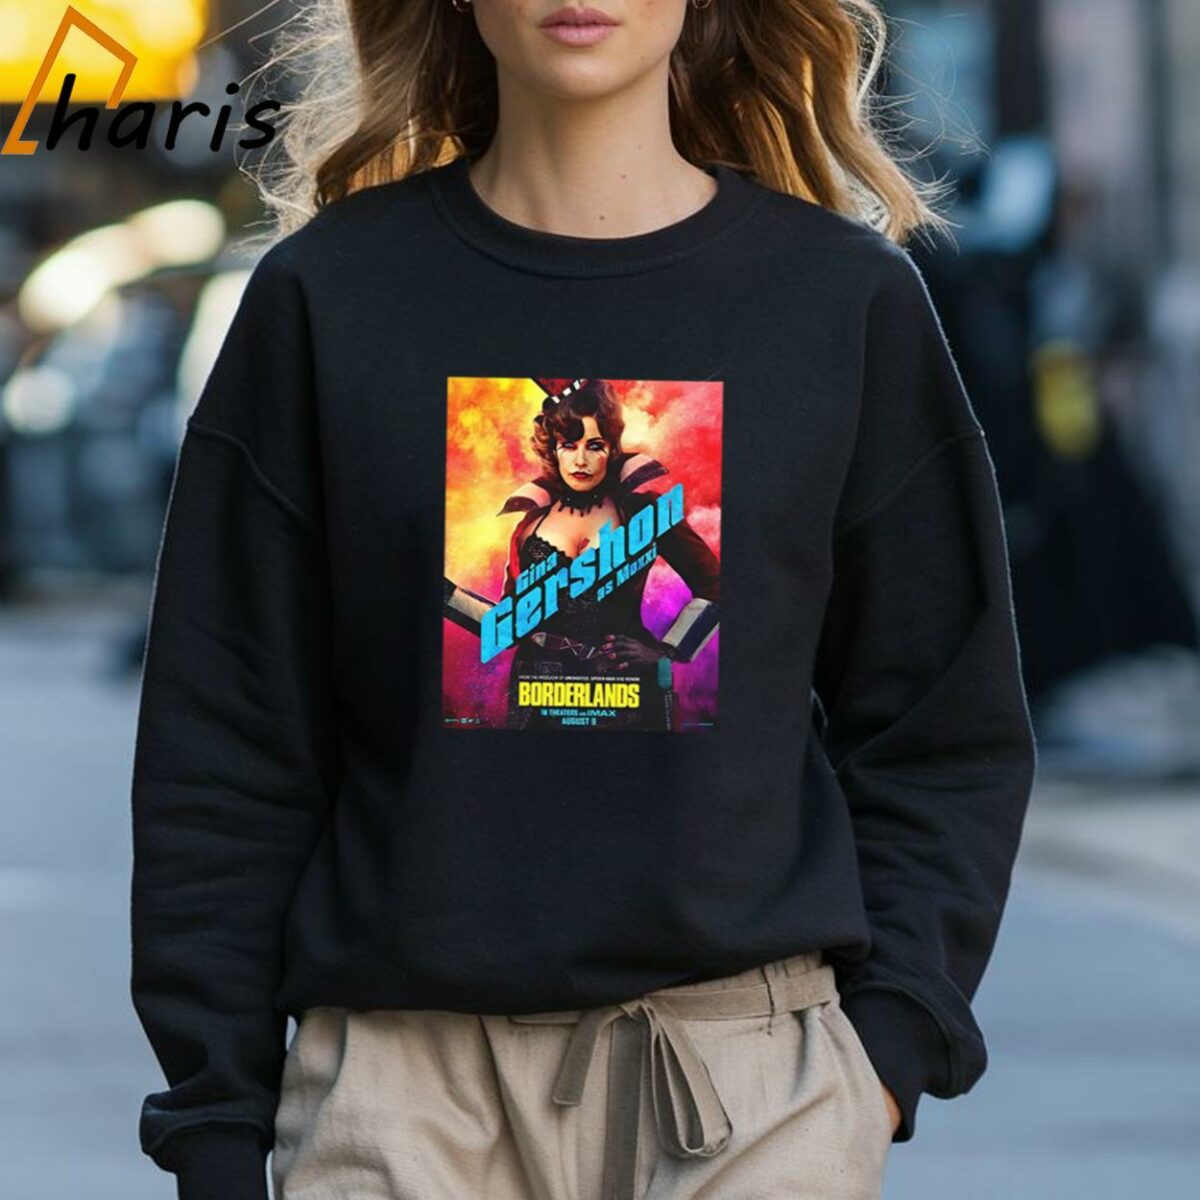 New Character Moxxi Posters For Borderlands Releasing In Theaters And IMAX On August 9 Unisex T Shirt 3 Sweatshirt